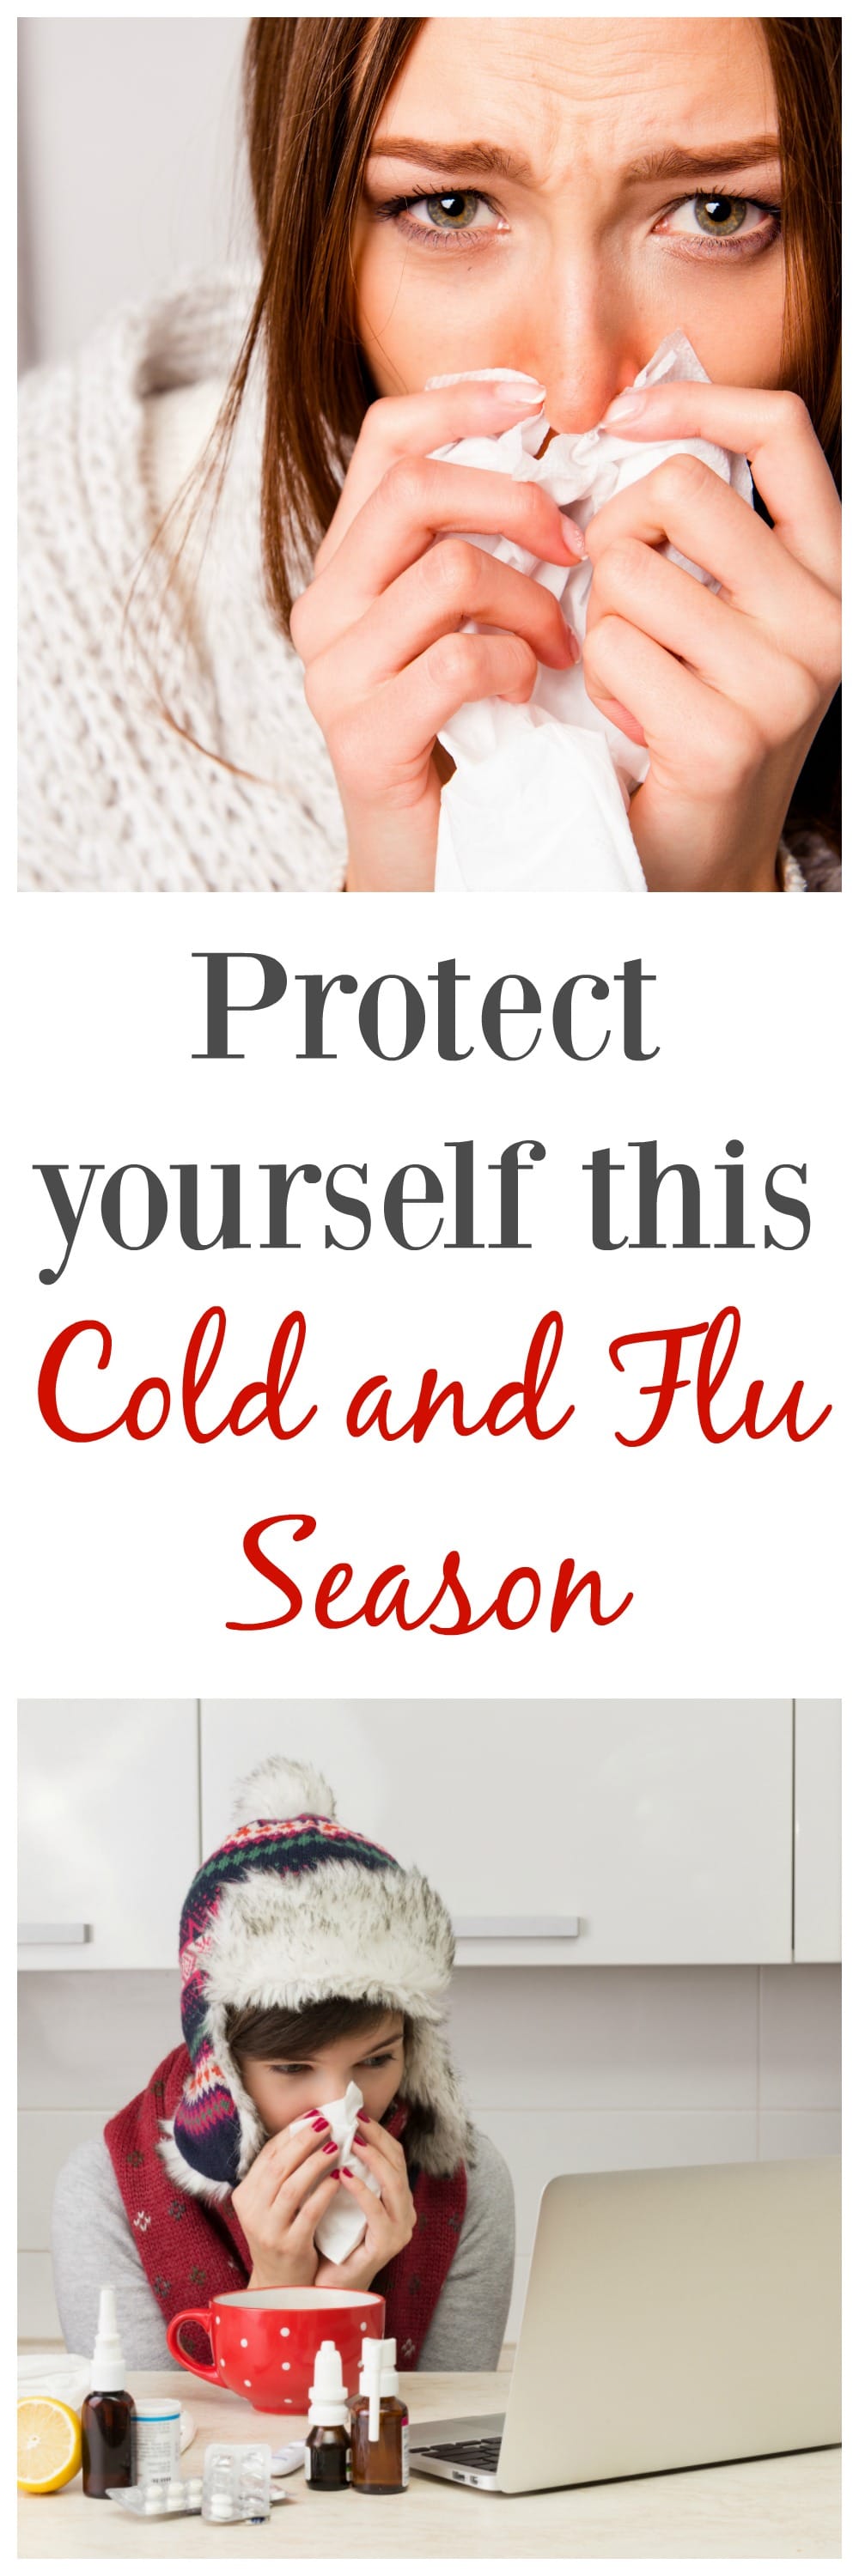 Protect Yourself this Cold and Flu Season